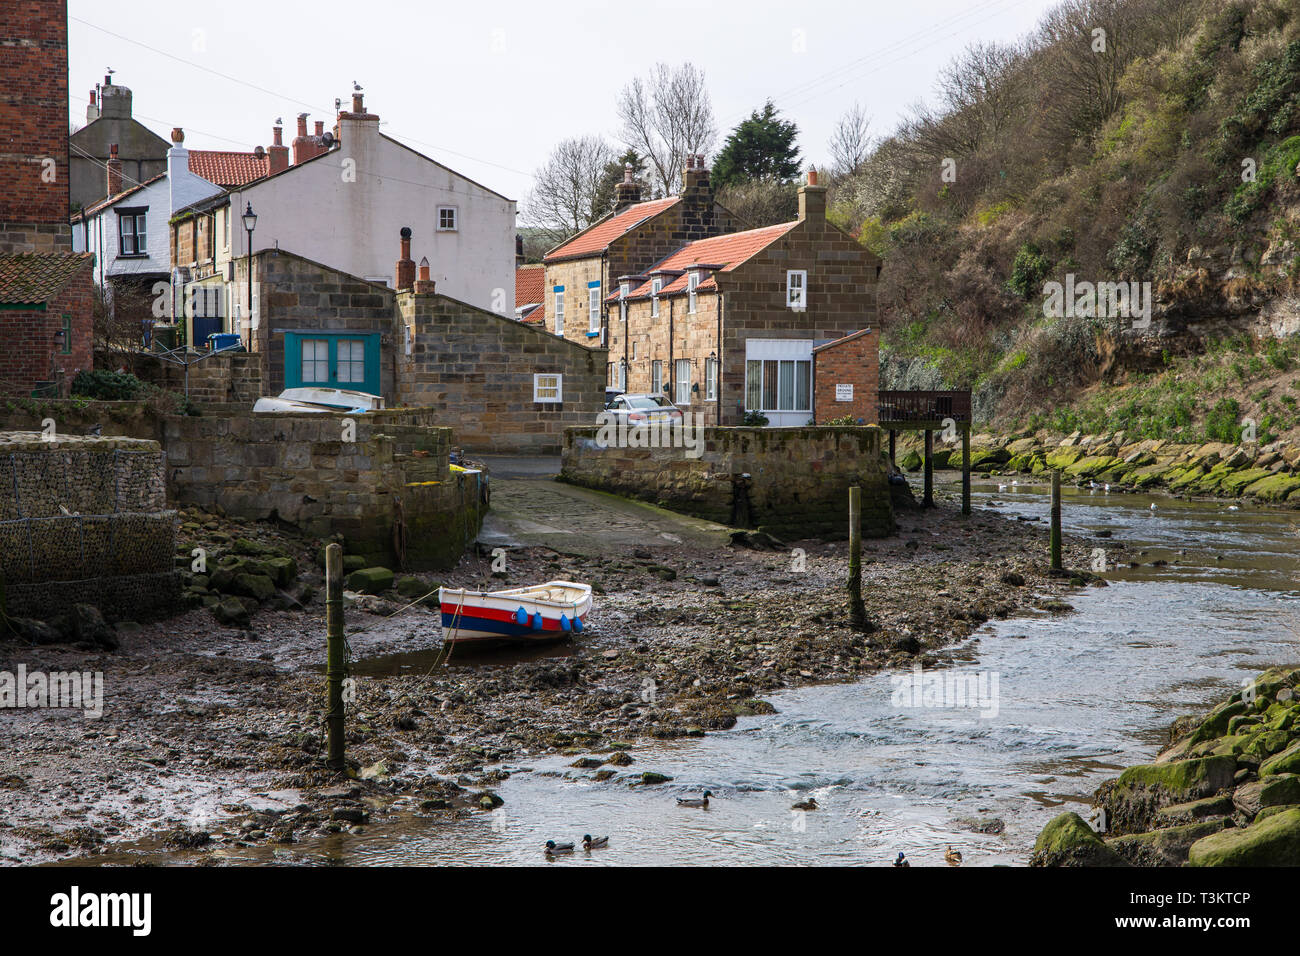 Cottages and rowing boat in Staithes Beck, Staithes, a traditional fishing village and seaside resort on the North Yorkshire coast, England UK. Stock Photo